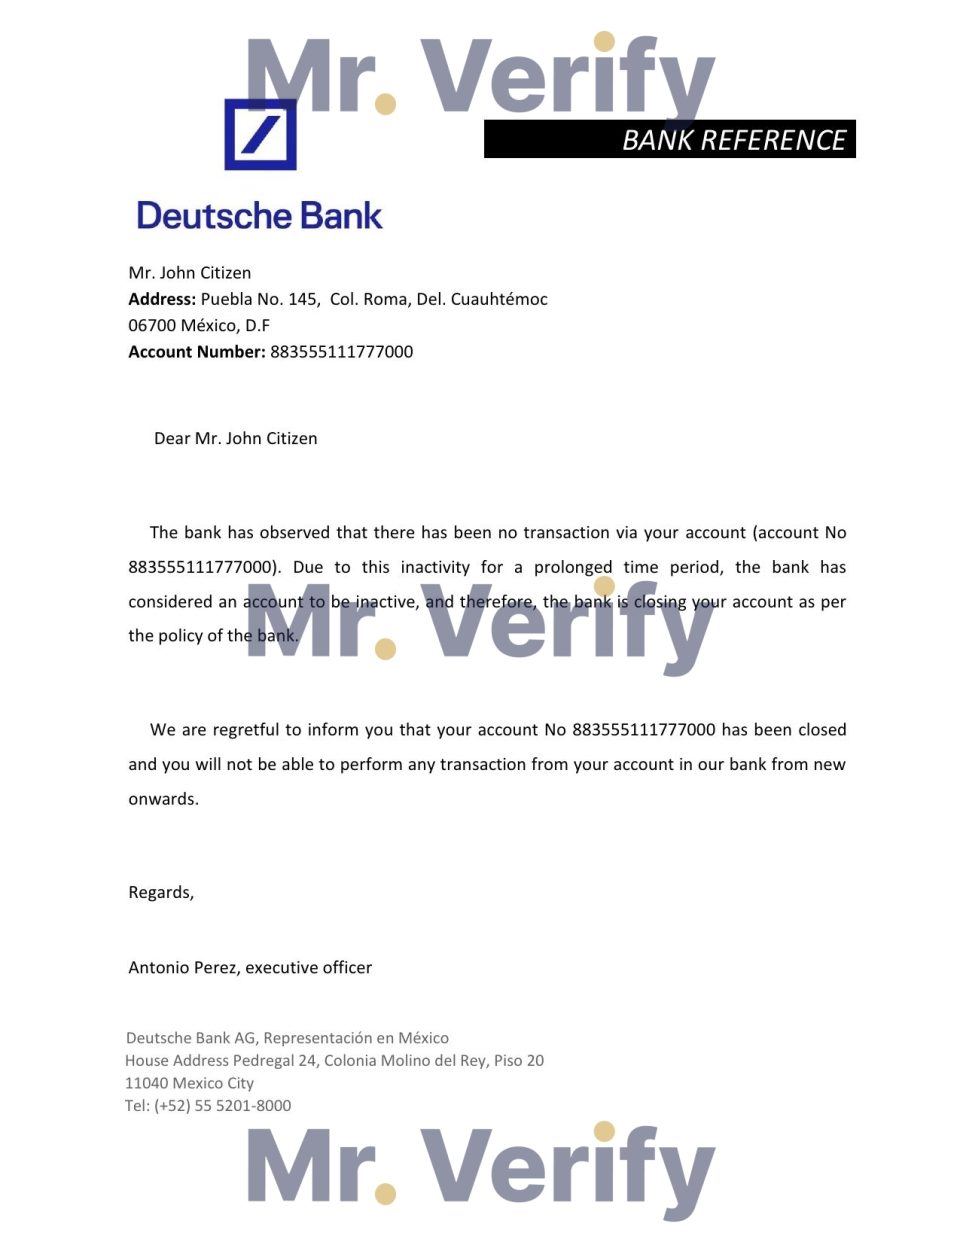 Download Mexico Deutsche Bank Reference Letter Templates | Editable Word